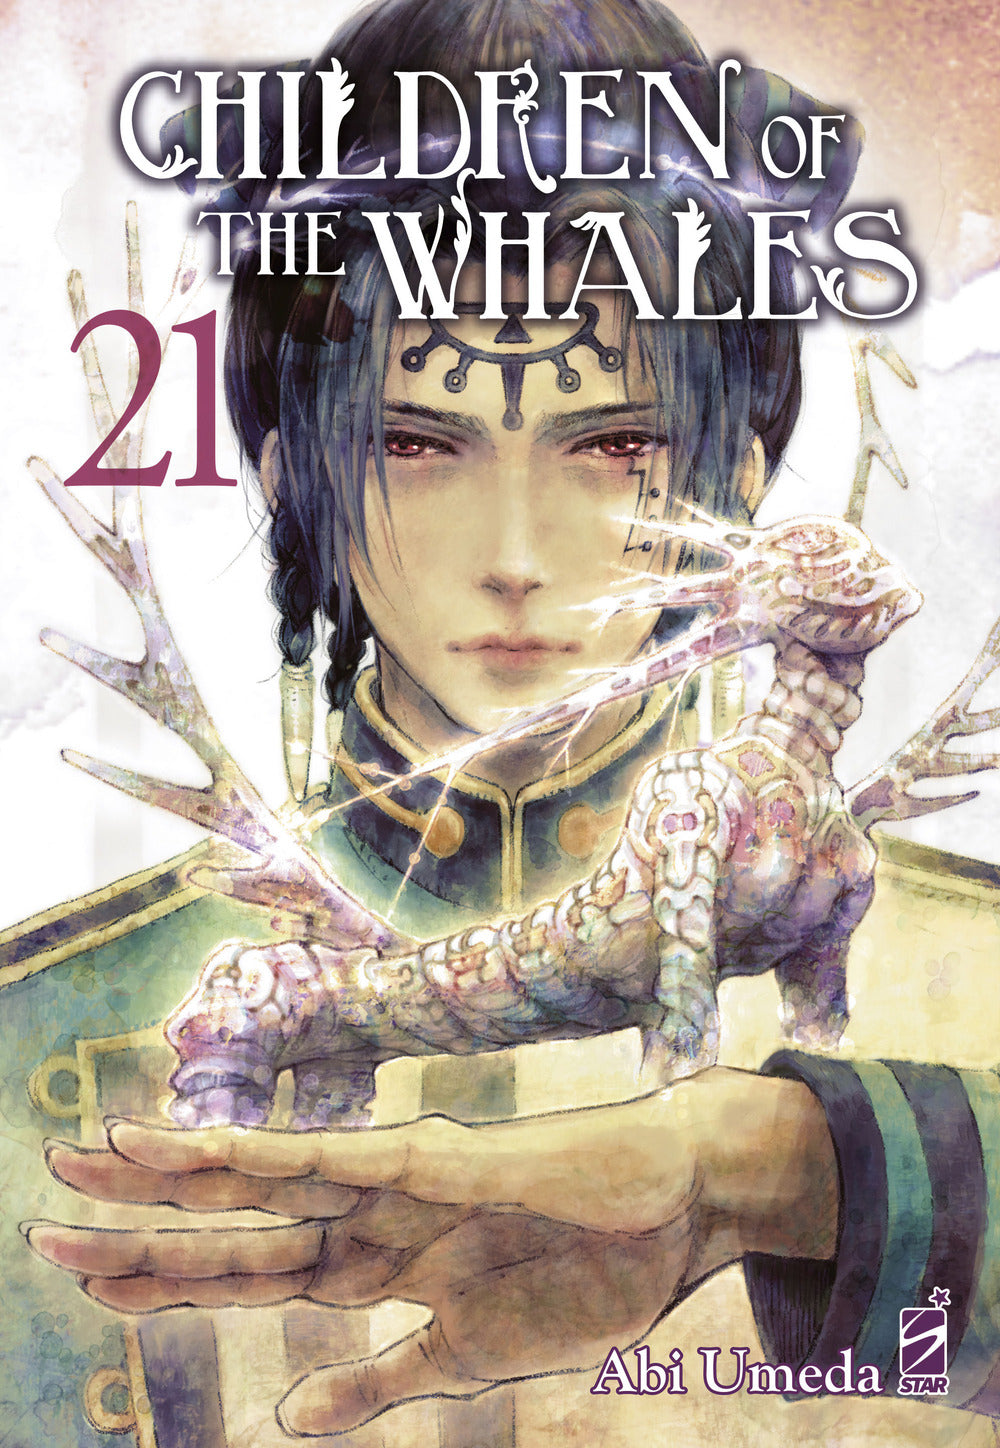 Children of the whales. Vol. 21.